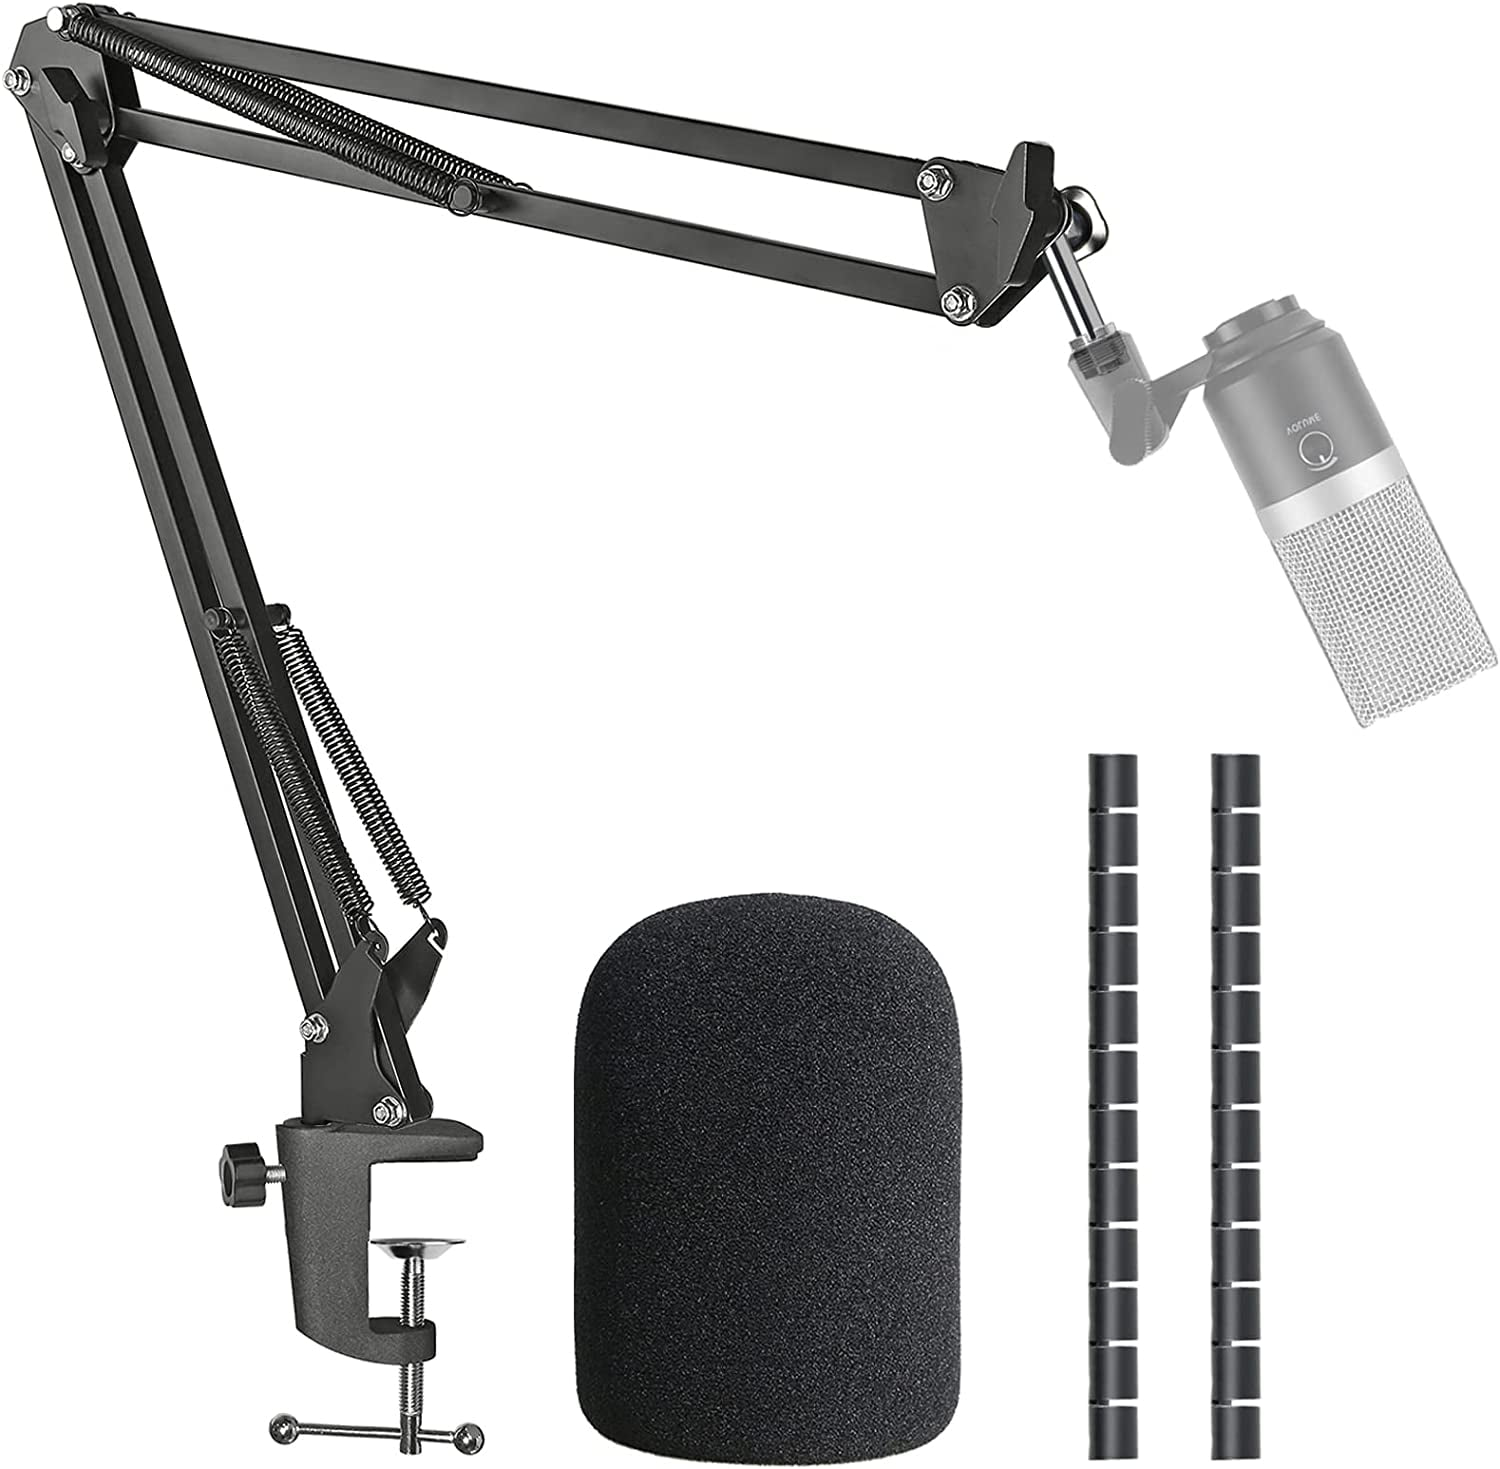 K670 Mic Boom Arm with Pop Filter, Compatible with Fifine K670 K658, Fifine USB with Cable Sleeve - Walmart.com